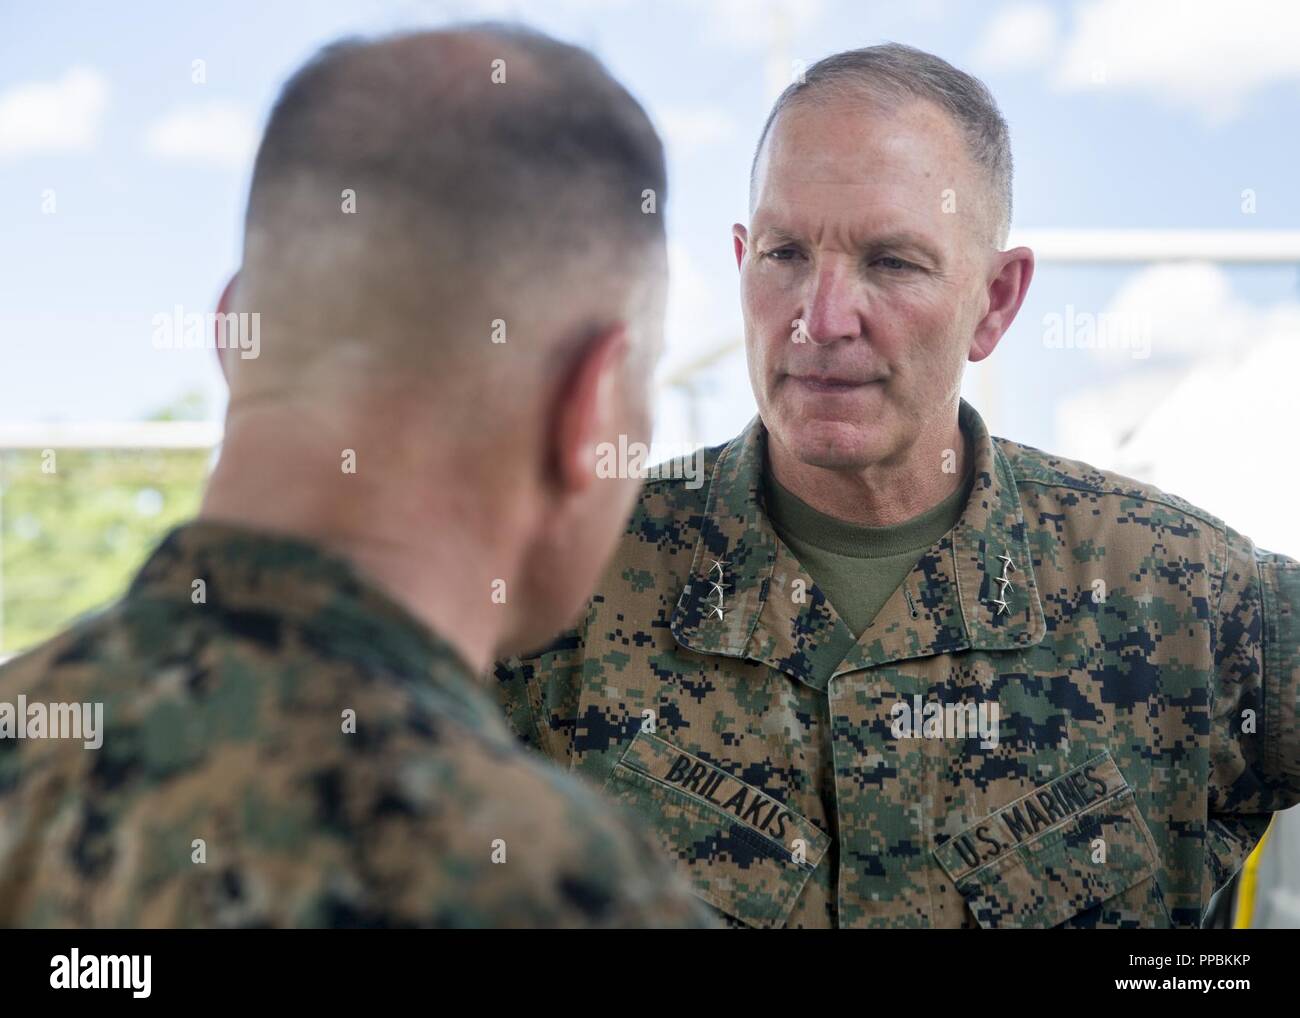 U.S. Marine Corps Lt.Gen. Mark A. Brilakis speaks to a Marine with Marine Medium Tiltrotor Squadron 365 during a visitation on Marine Corps Air Station New River, August 28, 2018. Lt.Gen. Brilakis visited the 2nd Marine Aircraft Wing (2d MAW) in order to orient himself on the current status of 2d Maw. Brilakis is the commanding general of Marine Forces Command. Stock Photo